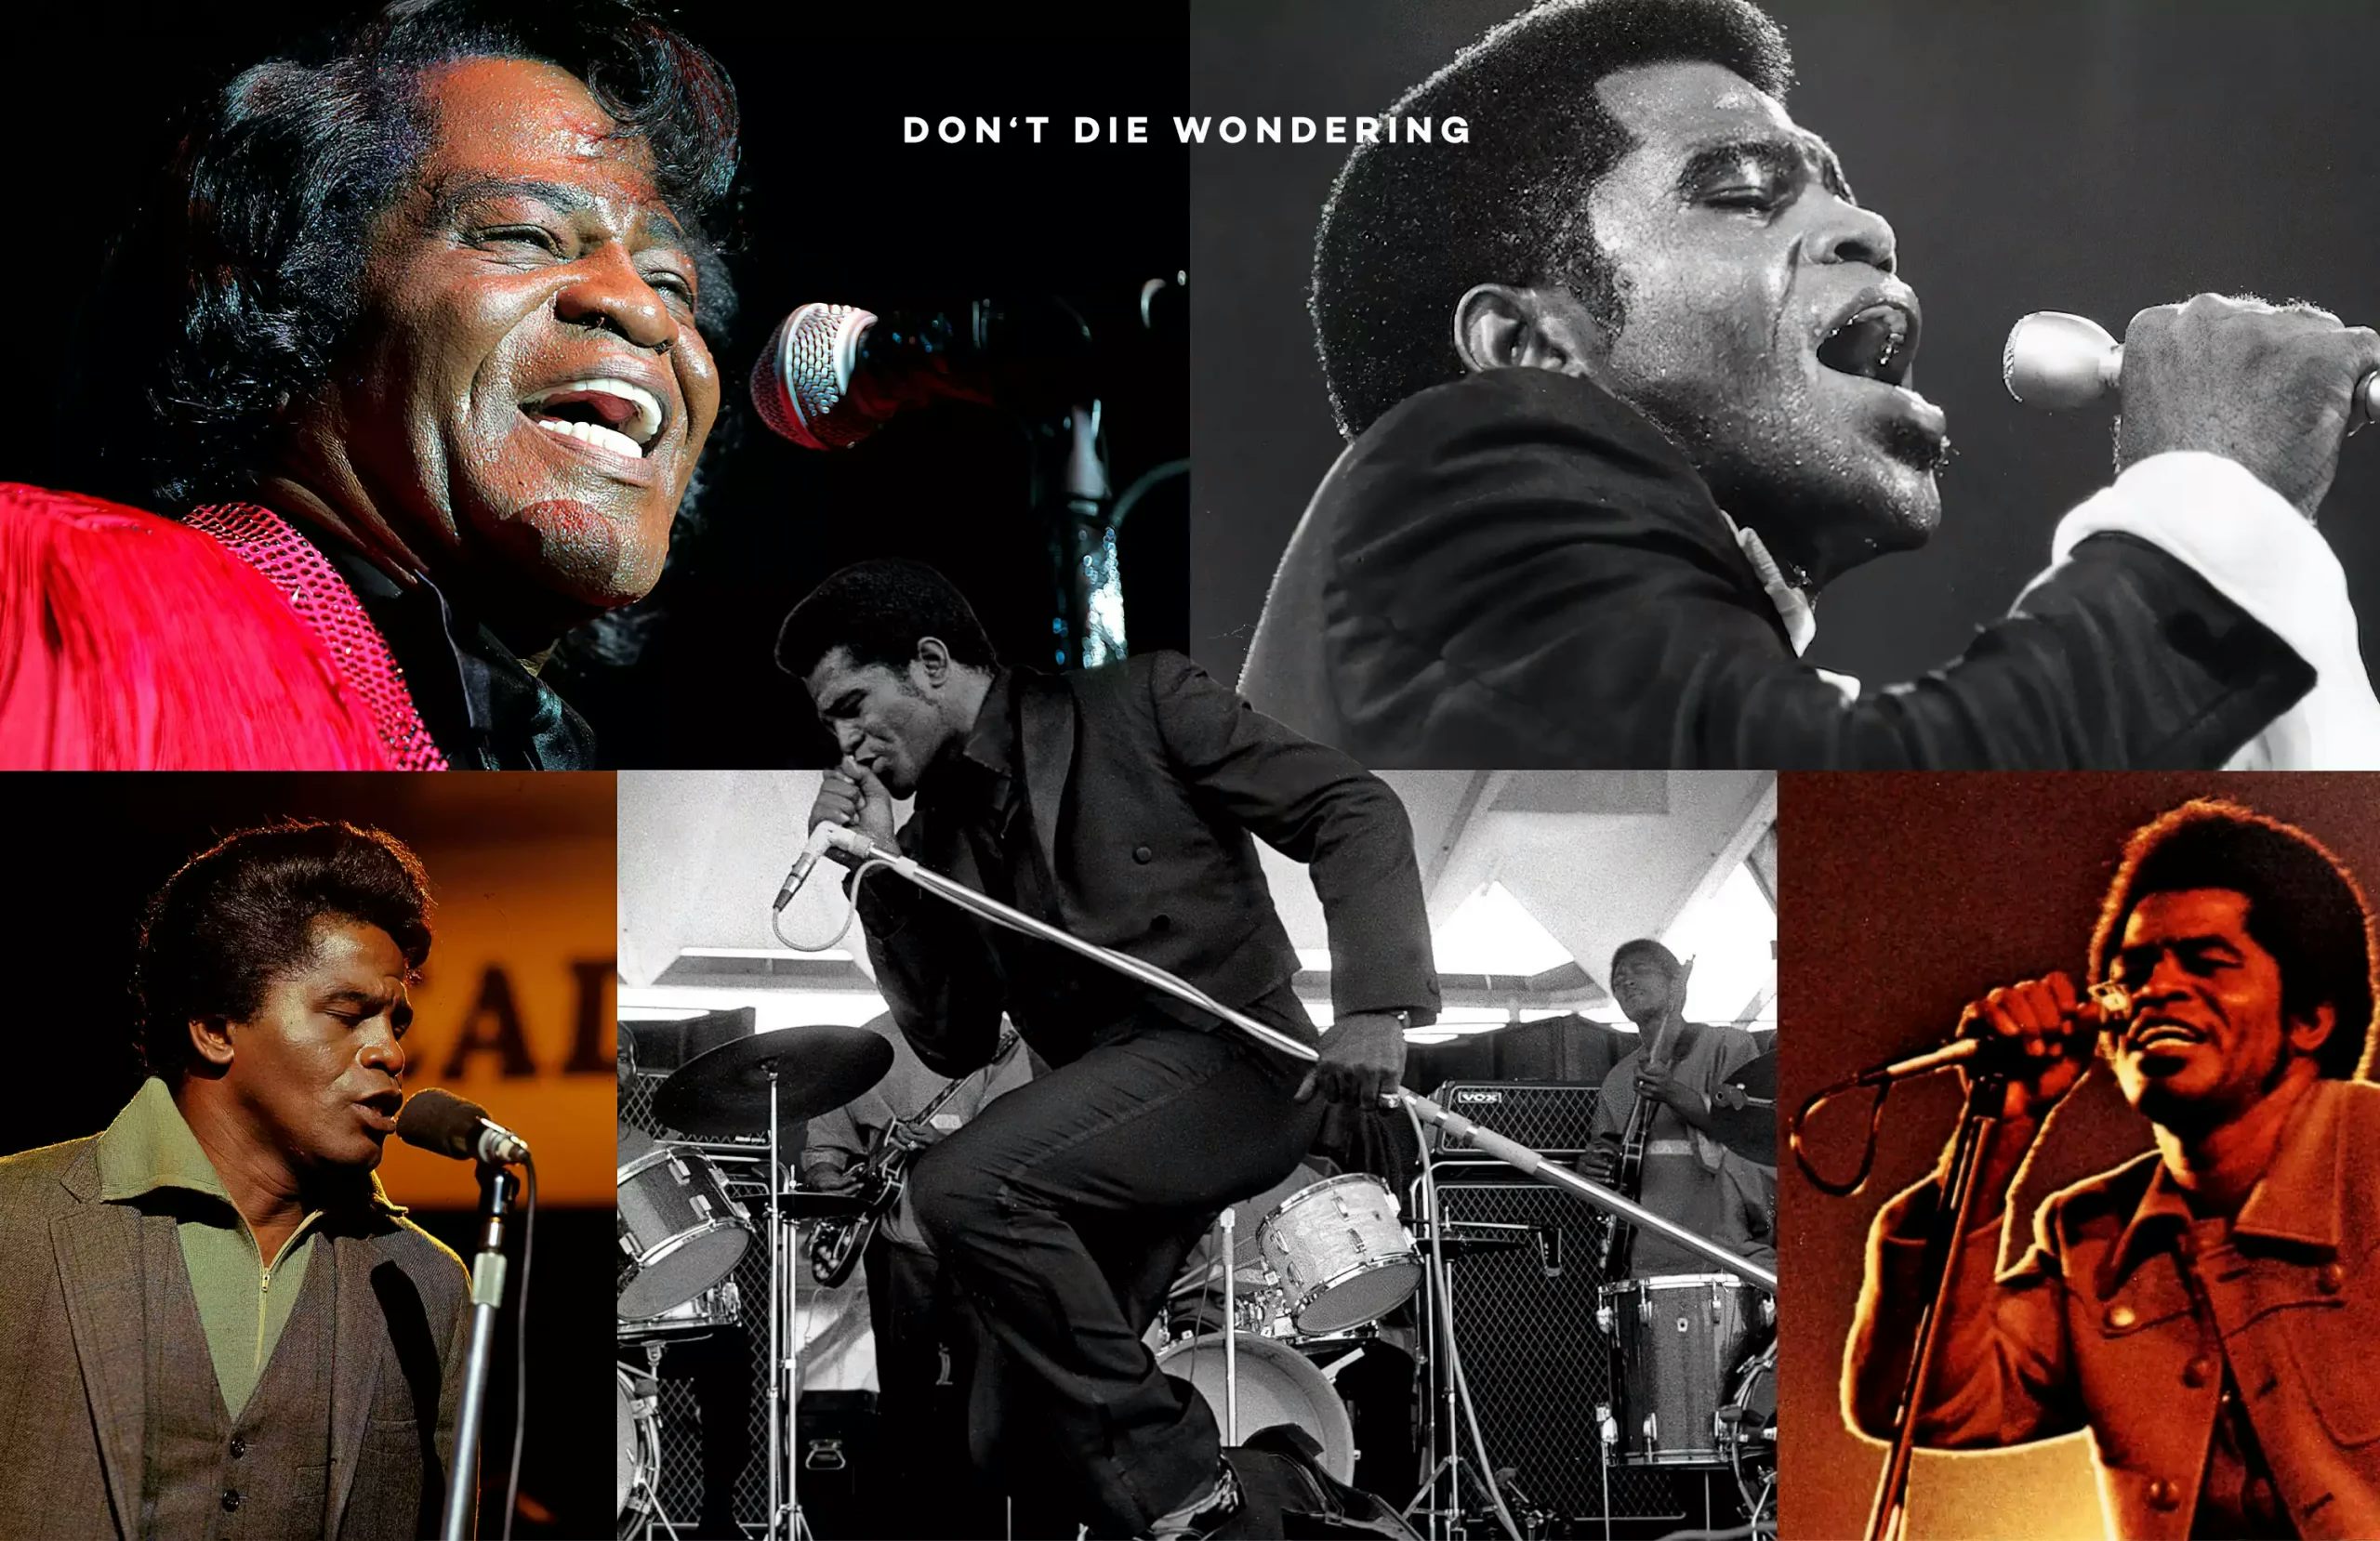 What To Expect From The New James Brown Documentary Series